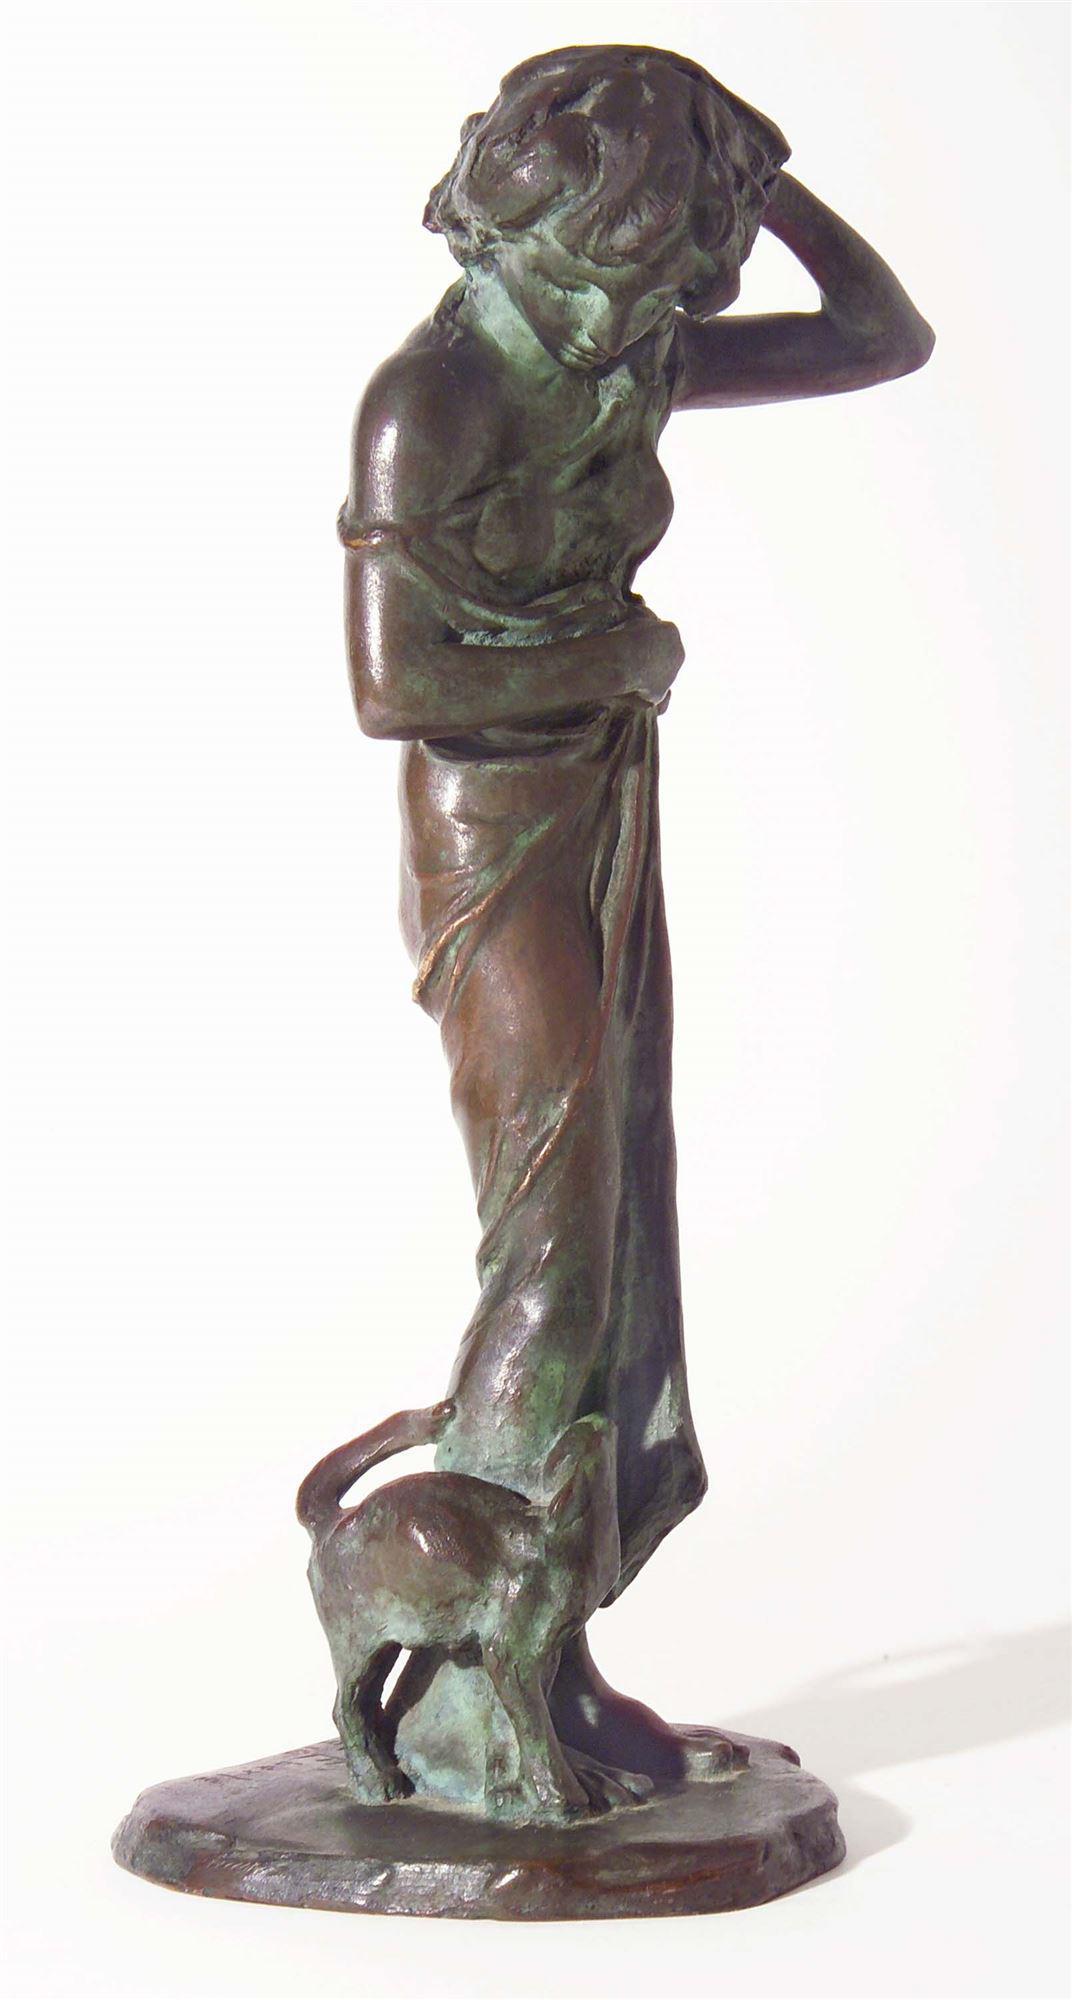 

											American Figurative  </b>

											<em>
												Now on view in New York</em> 

											<h4>
																							</h4>

		                																																													<i>Abastenia St. Leger Eberle,</i>  
																																								Yetta and the Cat Wake Up (Awakening or Girl and Kitten), 1916, 
																																								Bronze, 
																																								12 inches 
																								
		                				